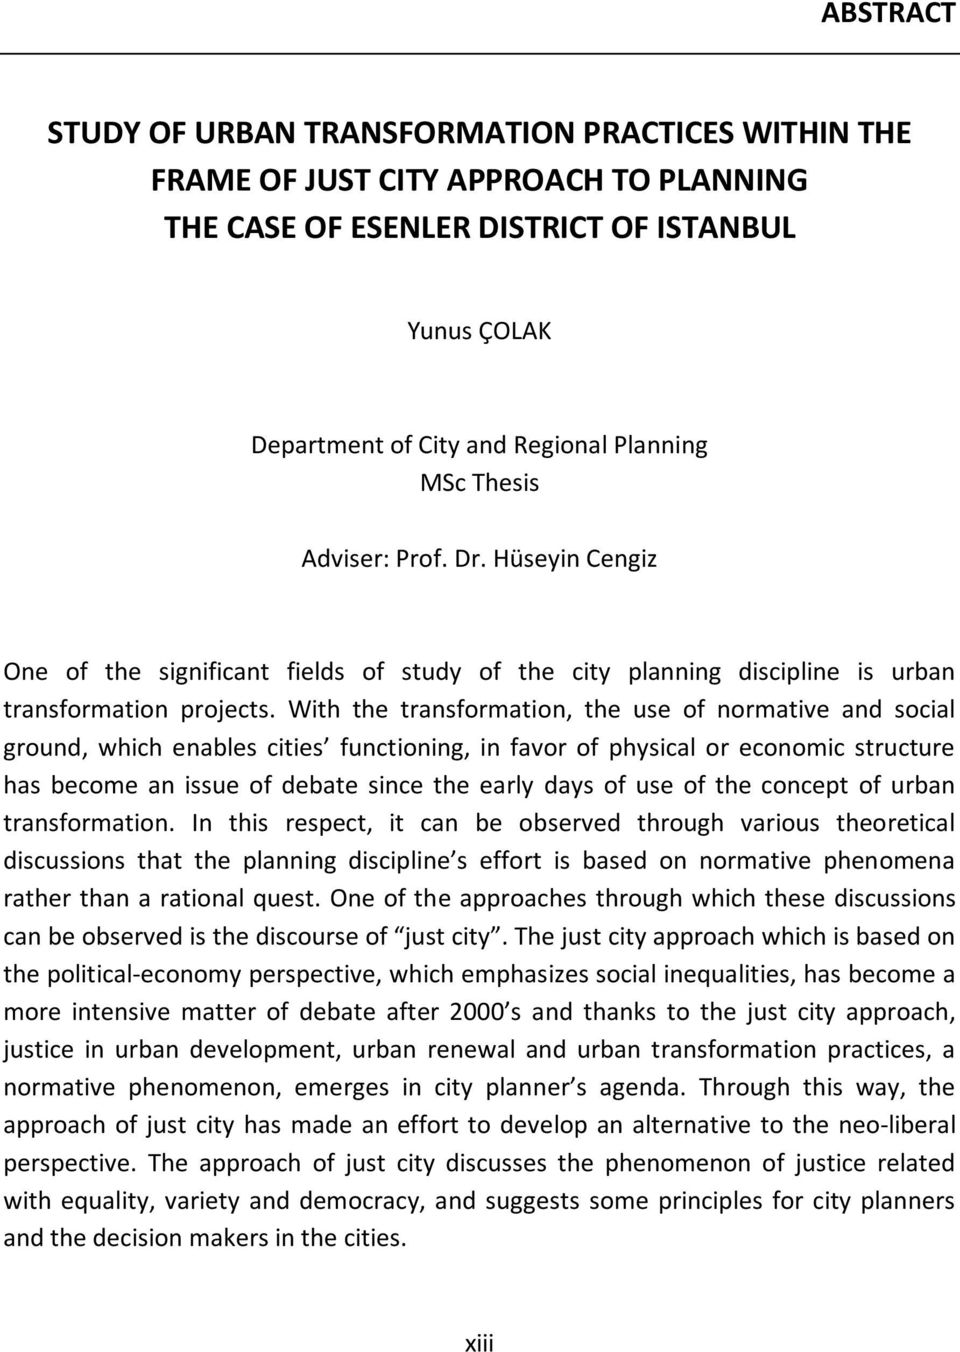 With the transformation, the use of normative and social ground, which enables cities functioning, in favor of physical or economic structure has become an issue of debate since the early days of use